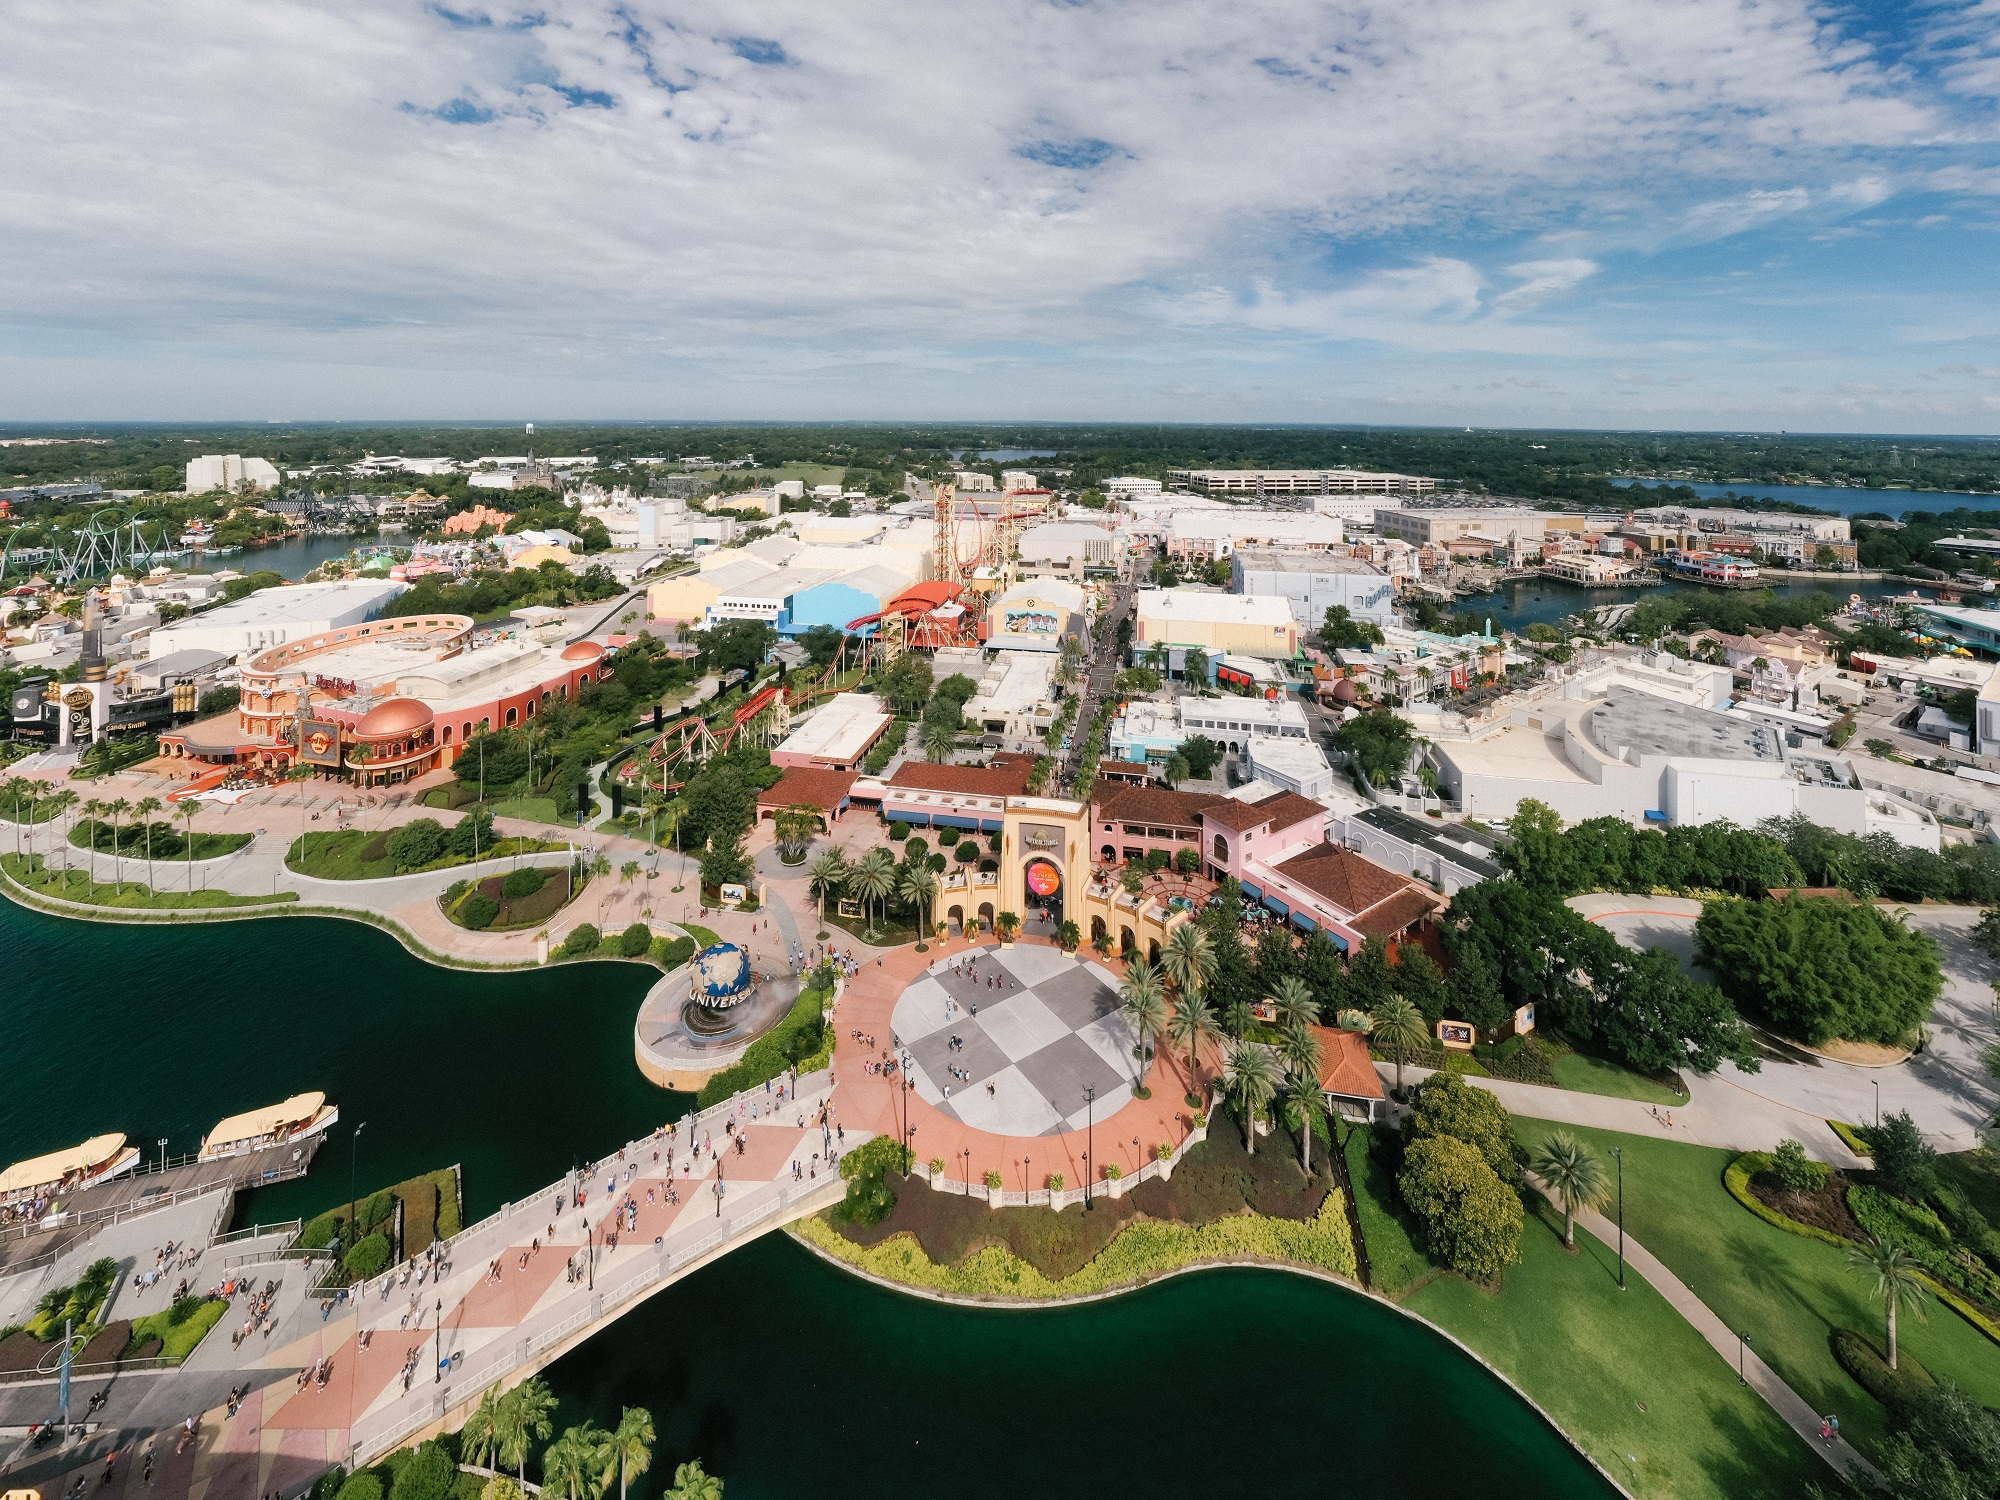 things to do in orlando besides theme parks